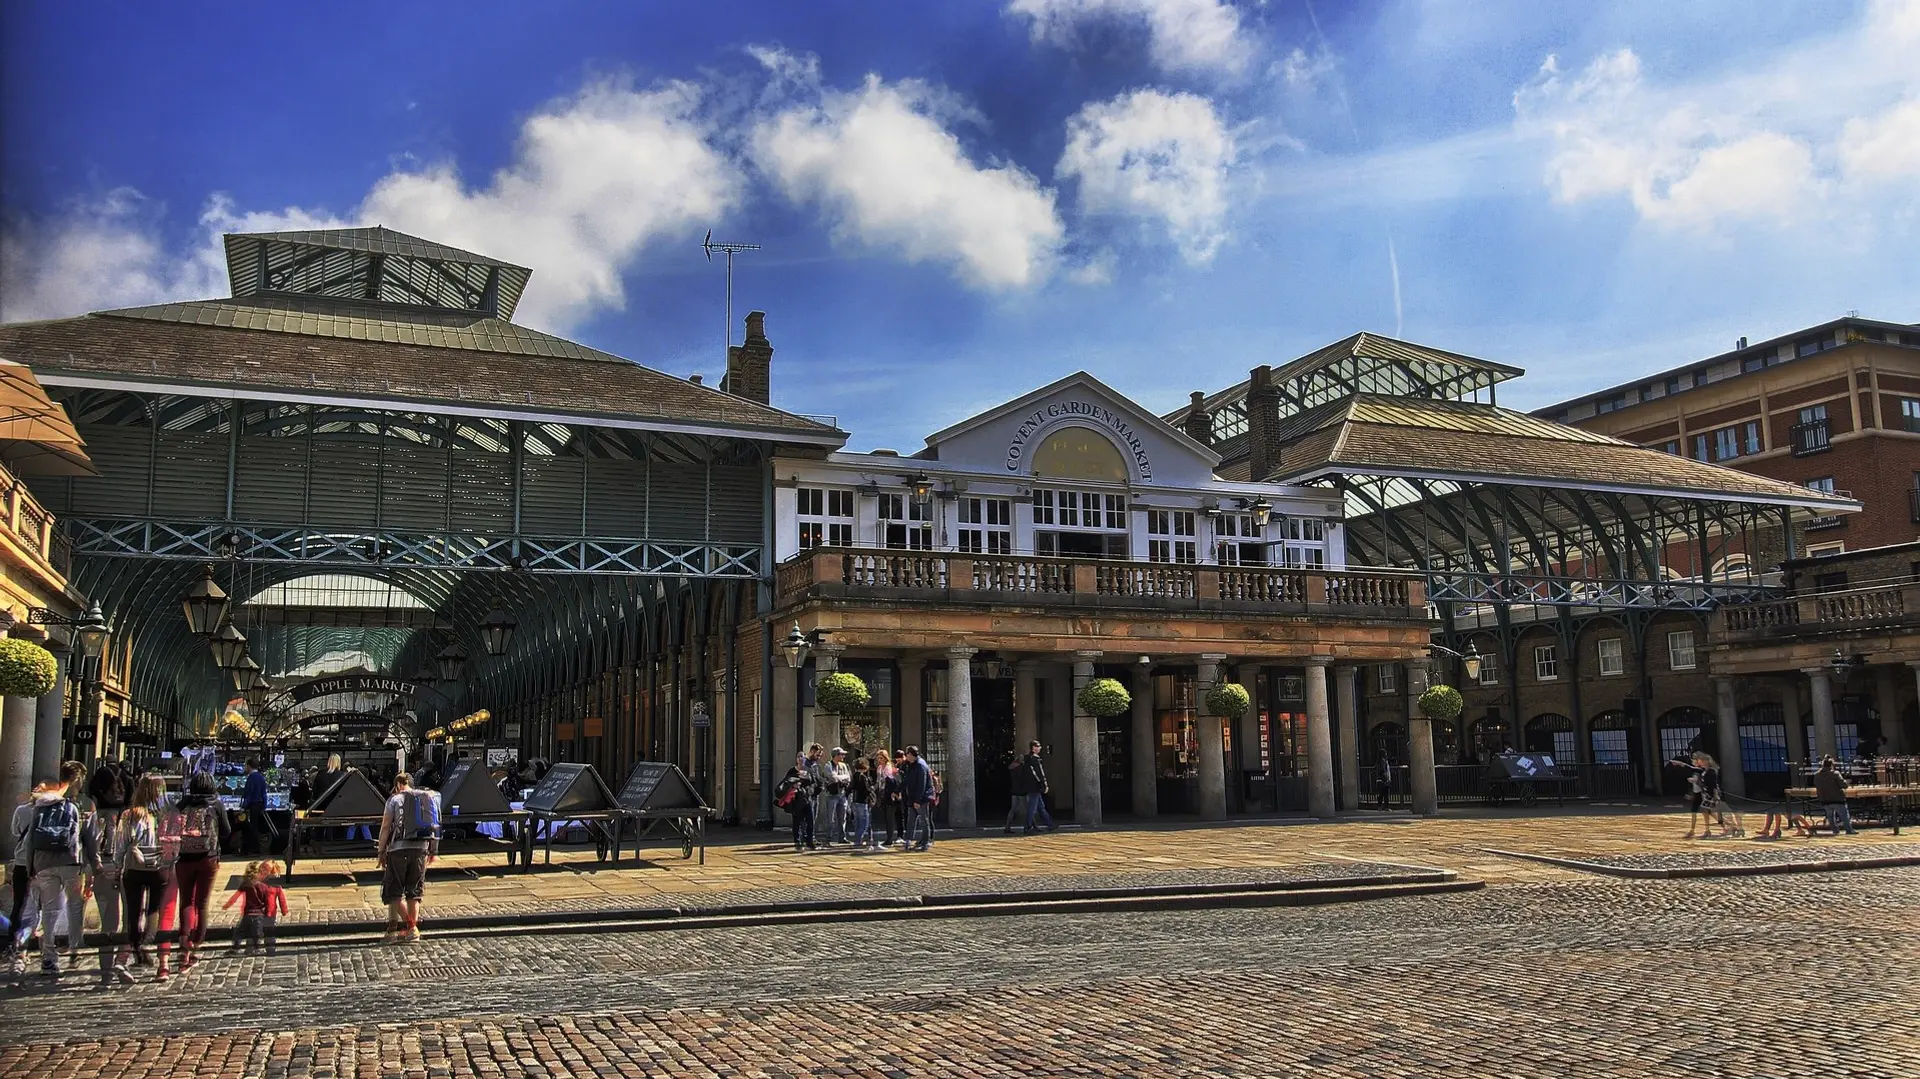 People exploring the Covent Garden